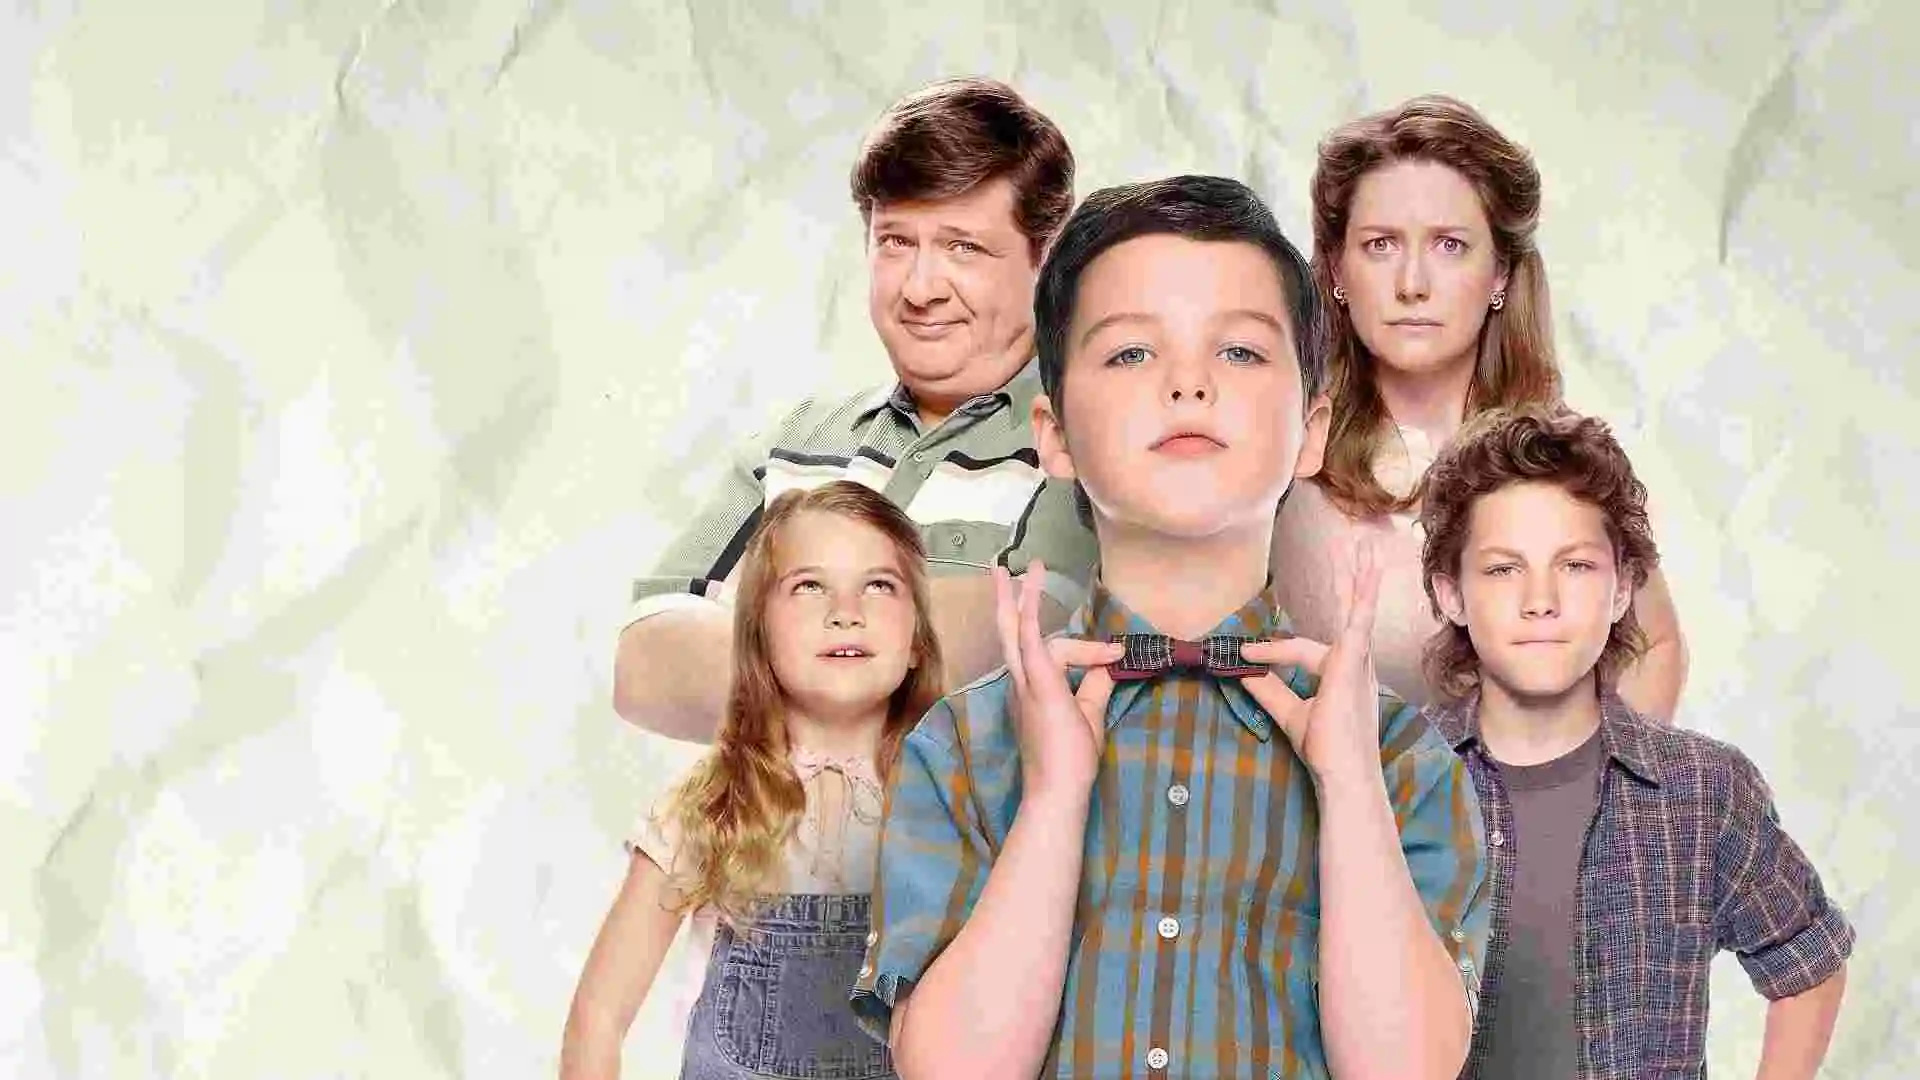 The Origin and Appeal of Young Sheldon